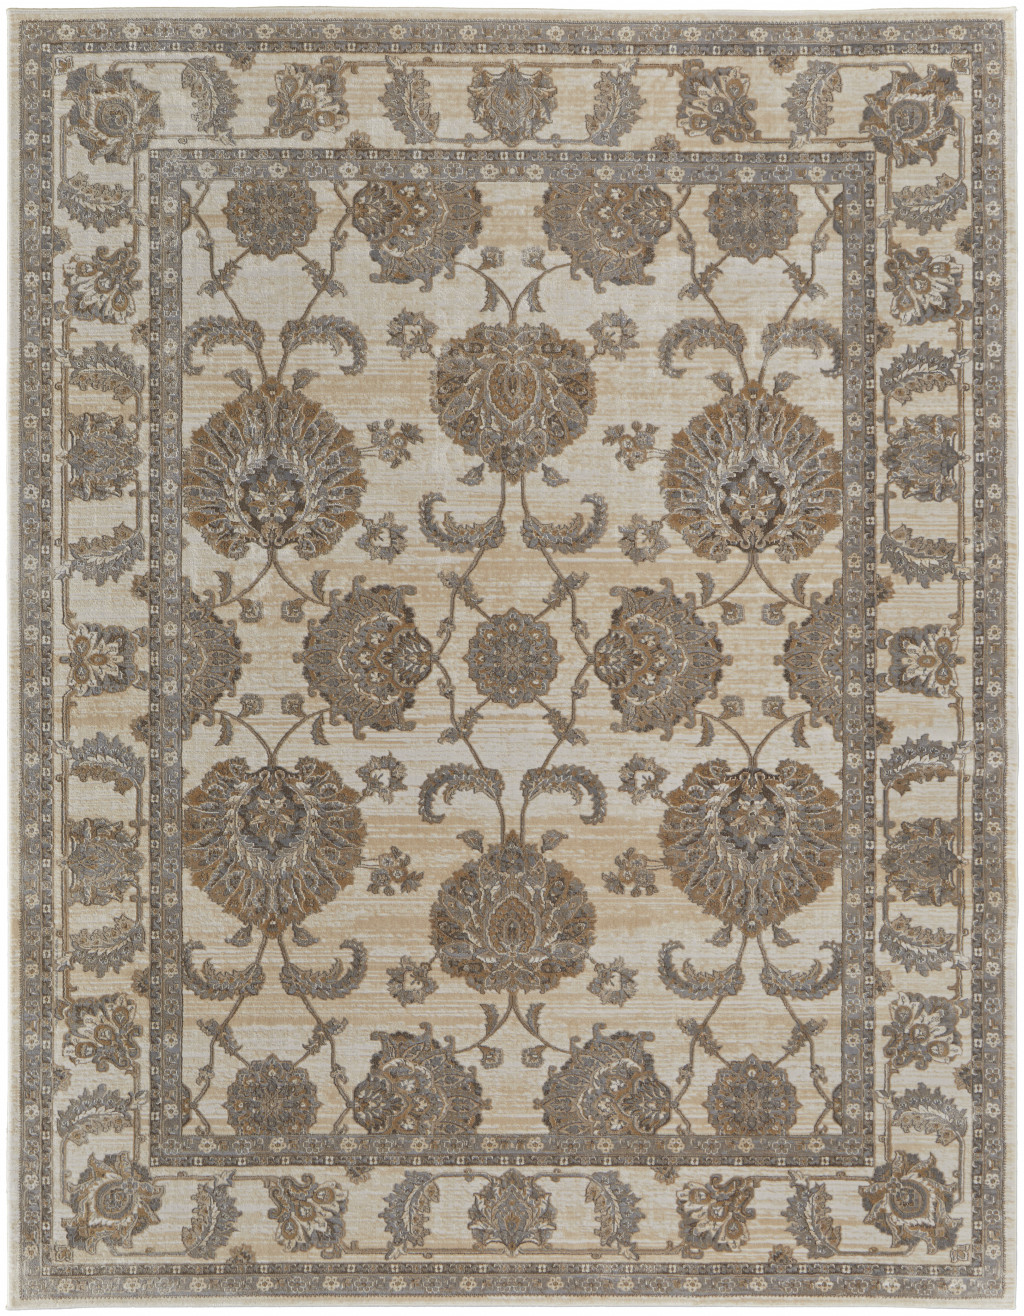 10' X 14' Tan Ivory And Brown Power Loom Area Rug-515039-1